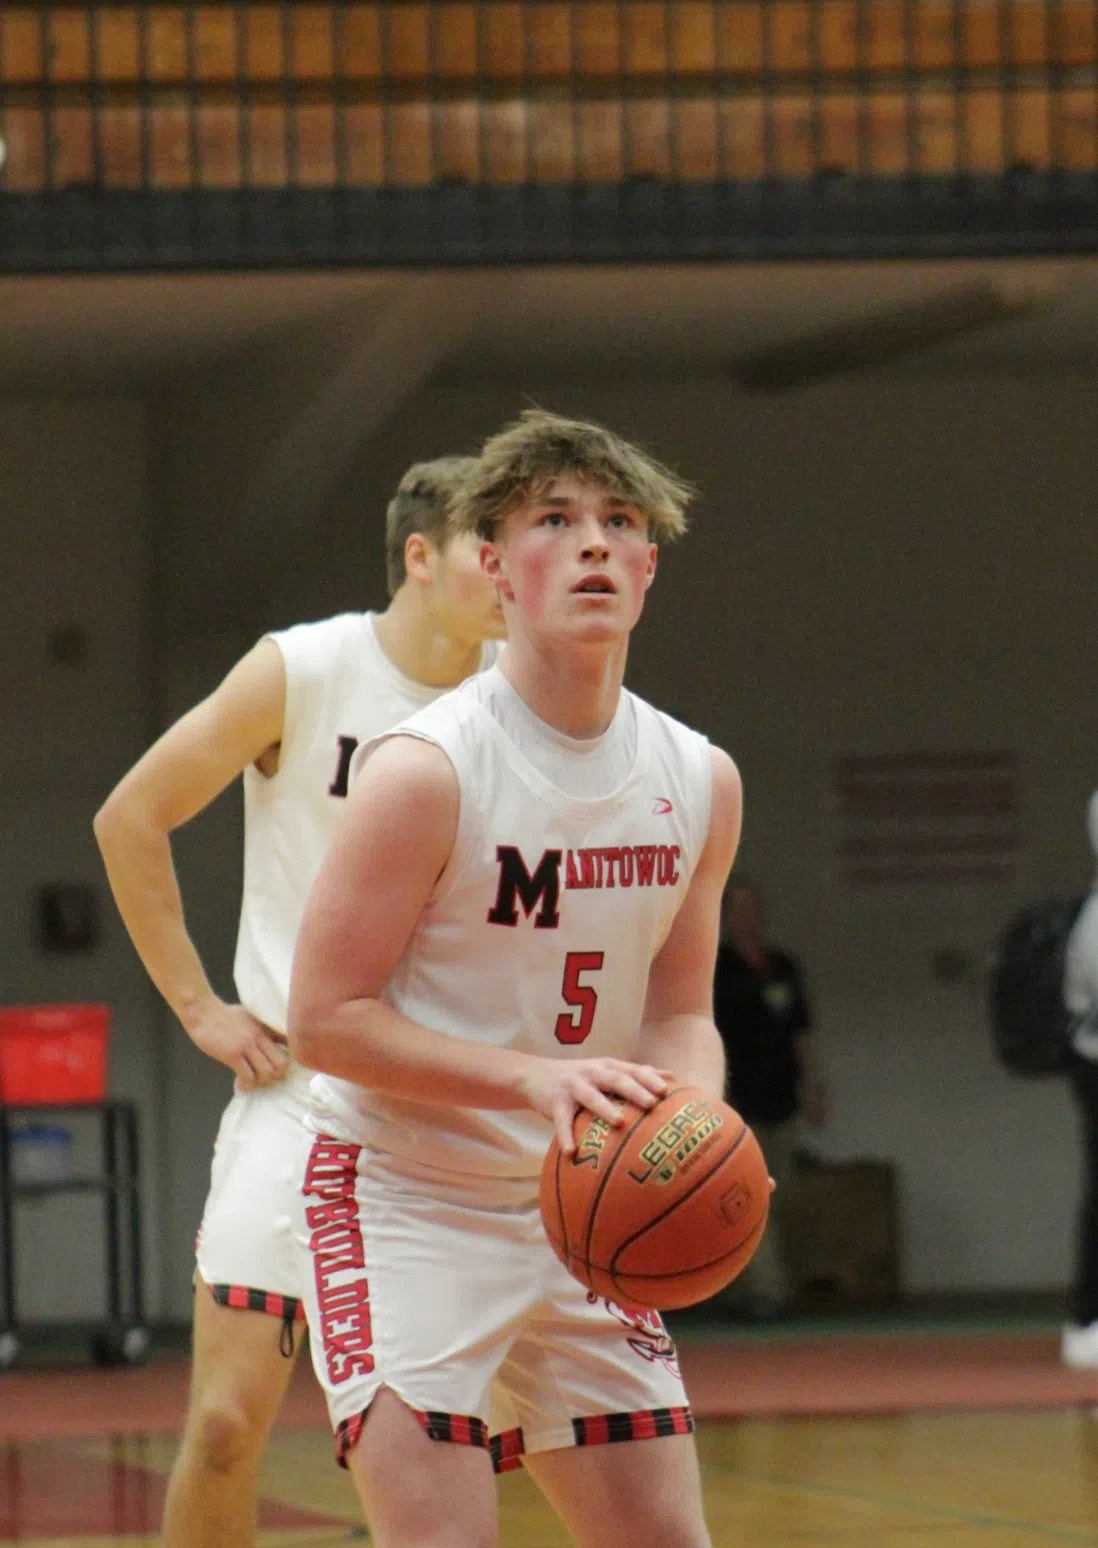 Manitowoc Lincoln Boys Fall to Notre Dame